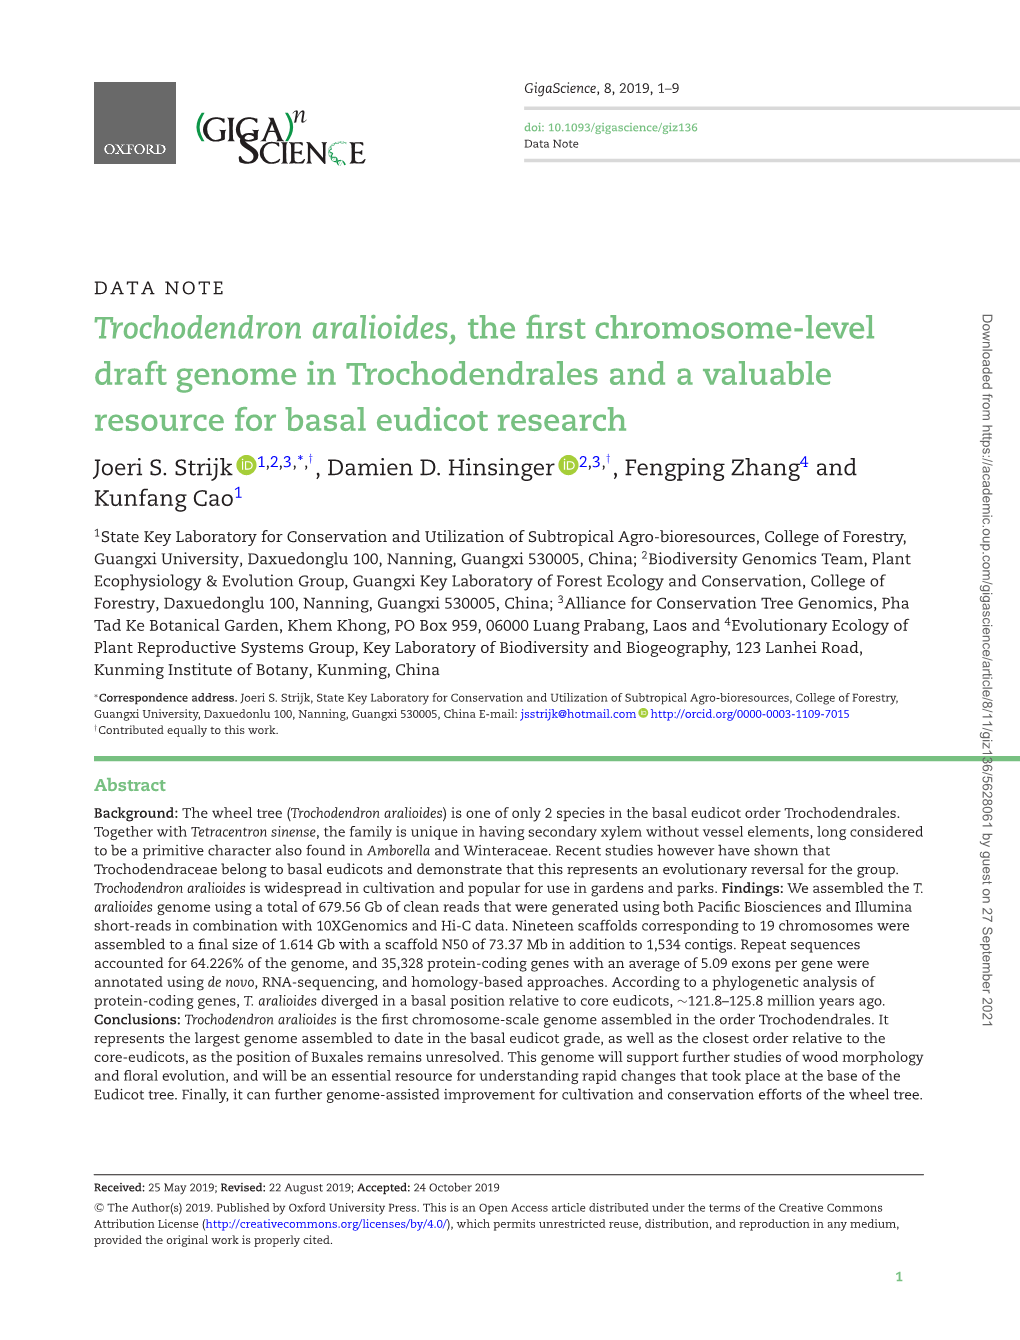 Trochodendron Aralioides, the First Chromosome-Level Draft Genome in Trochodendrales and a Valuable Resource for Basal Eudicot Research